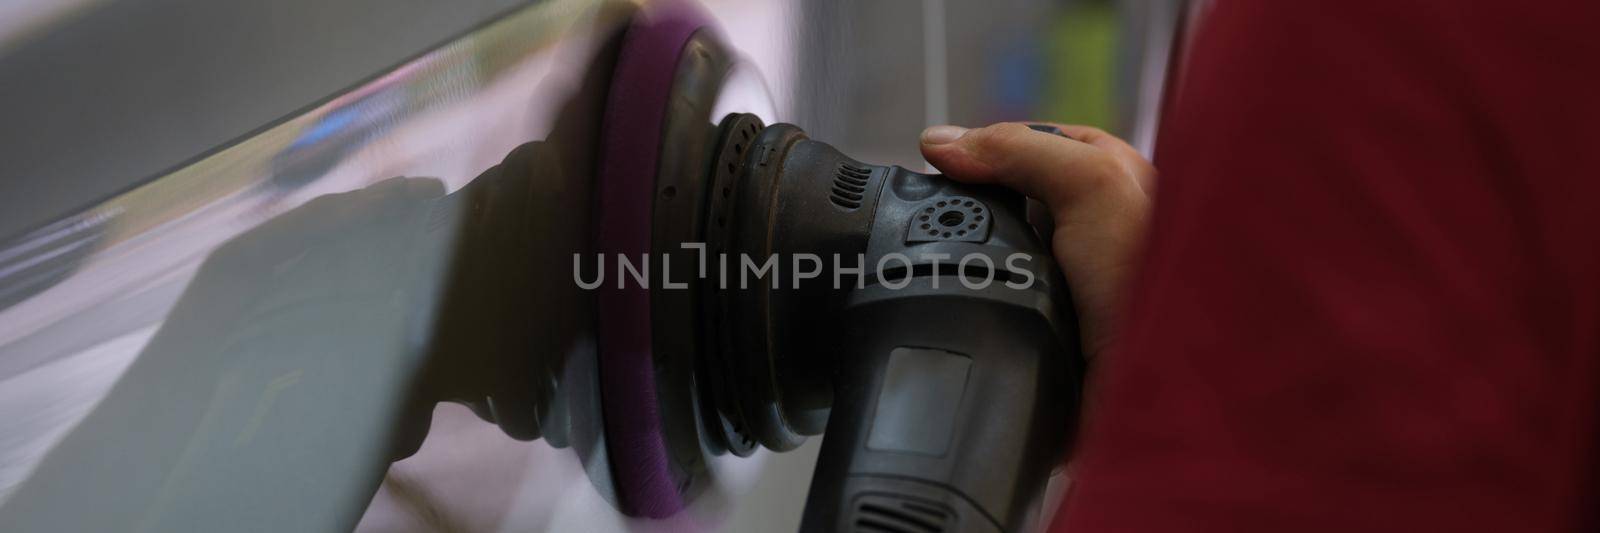 A repairman polishes a car body, close-up of a hand. Equipment for removing scratches, removing paint irregularities